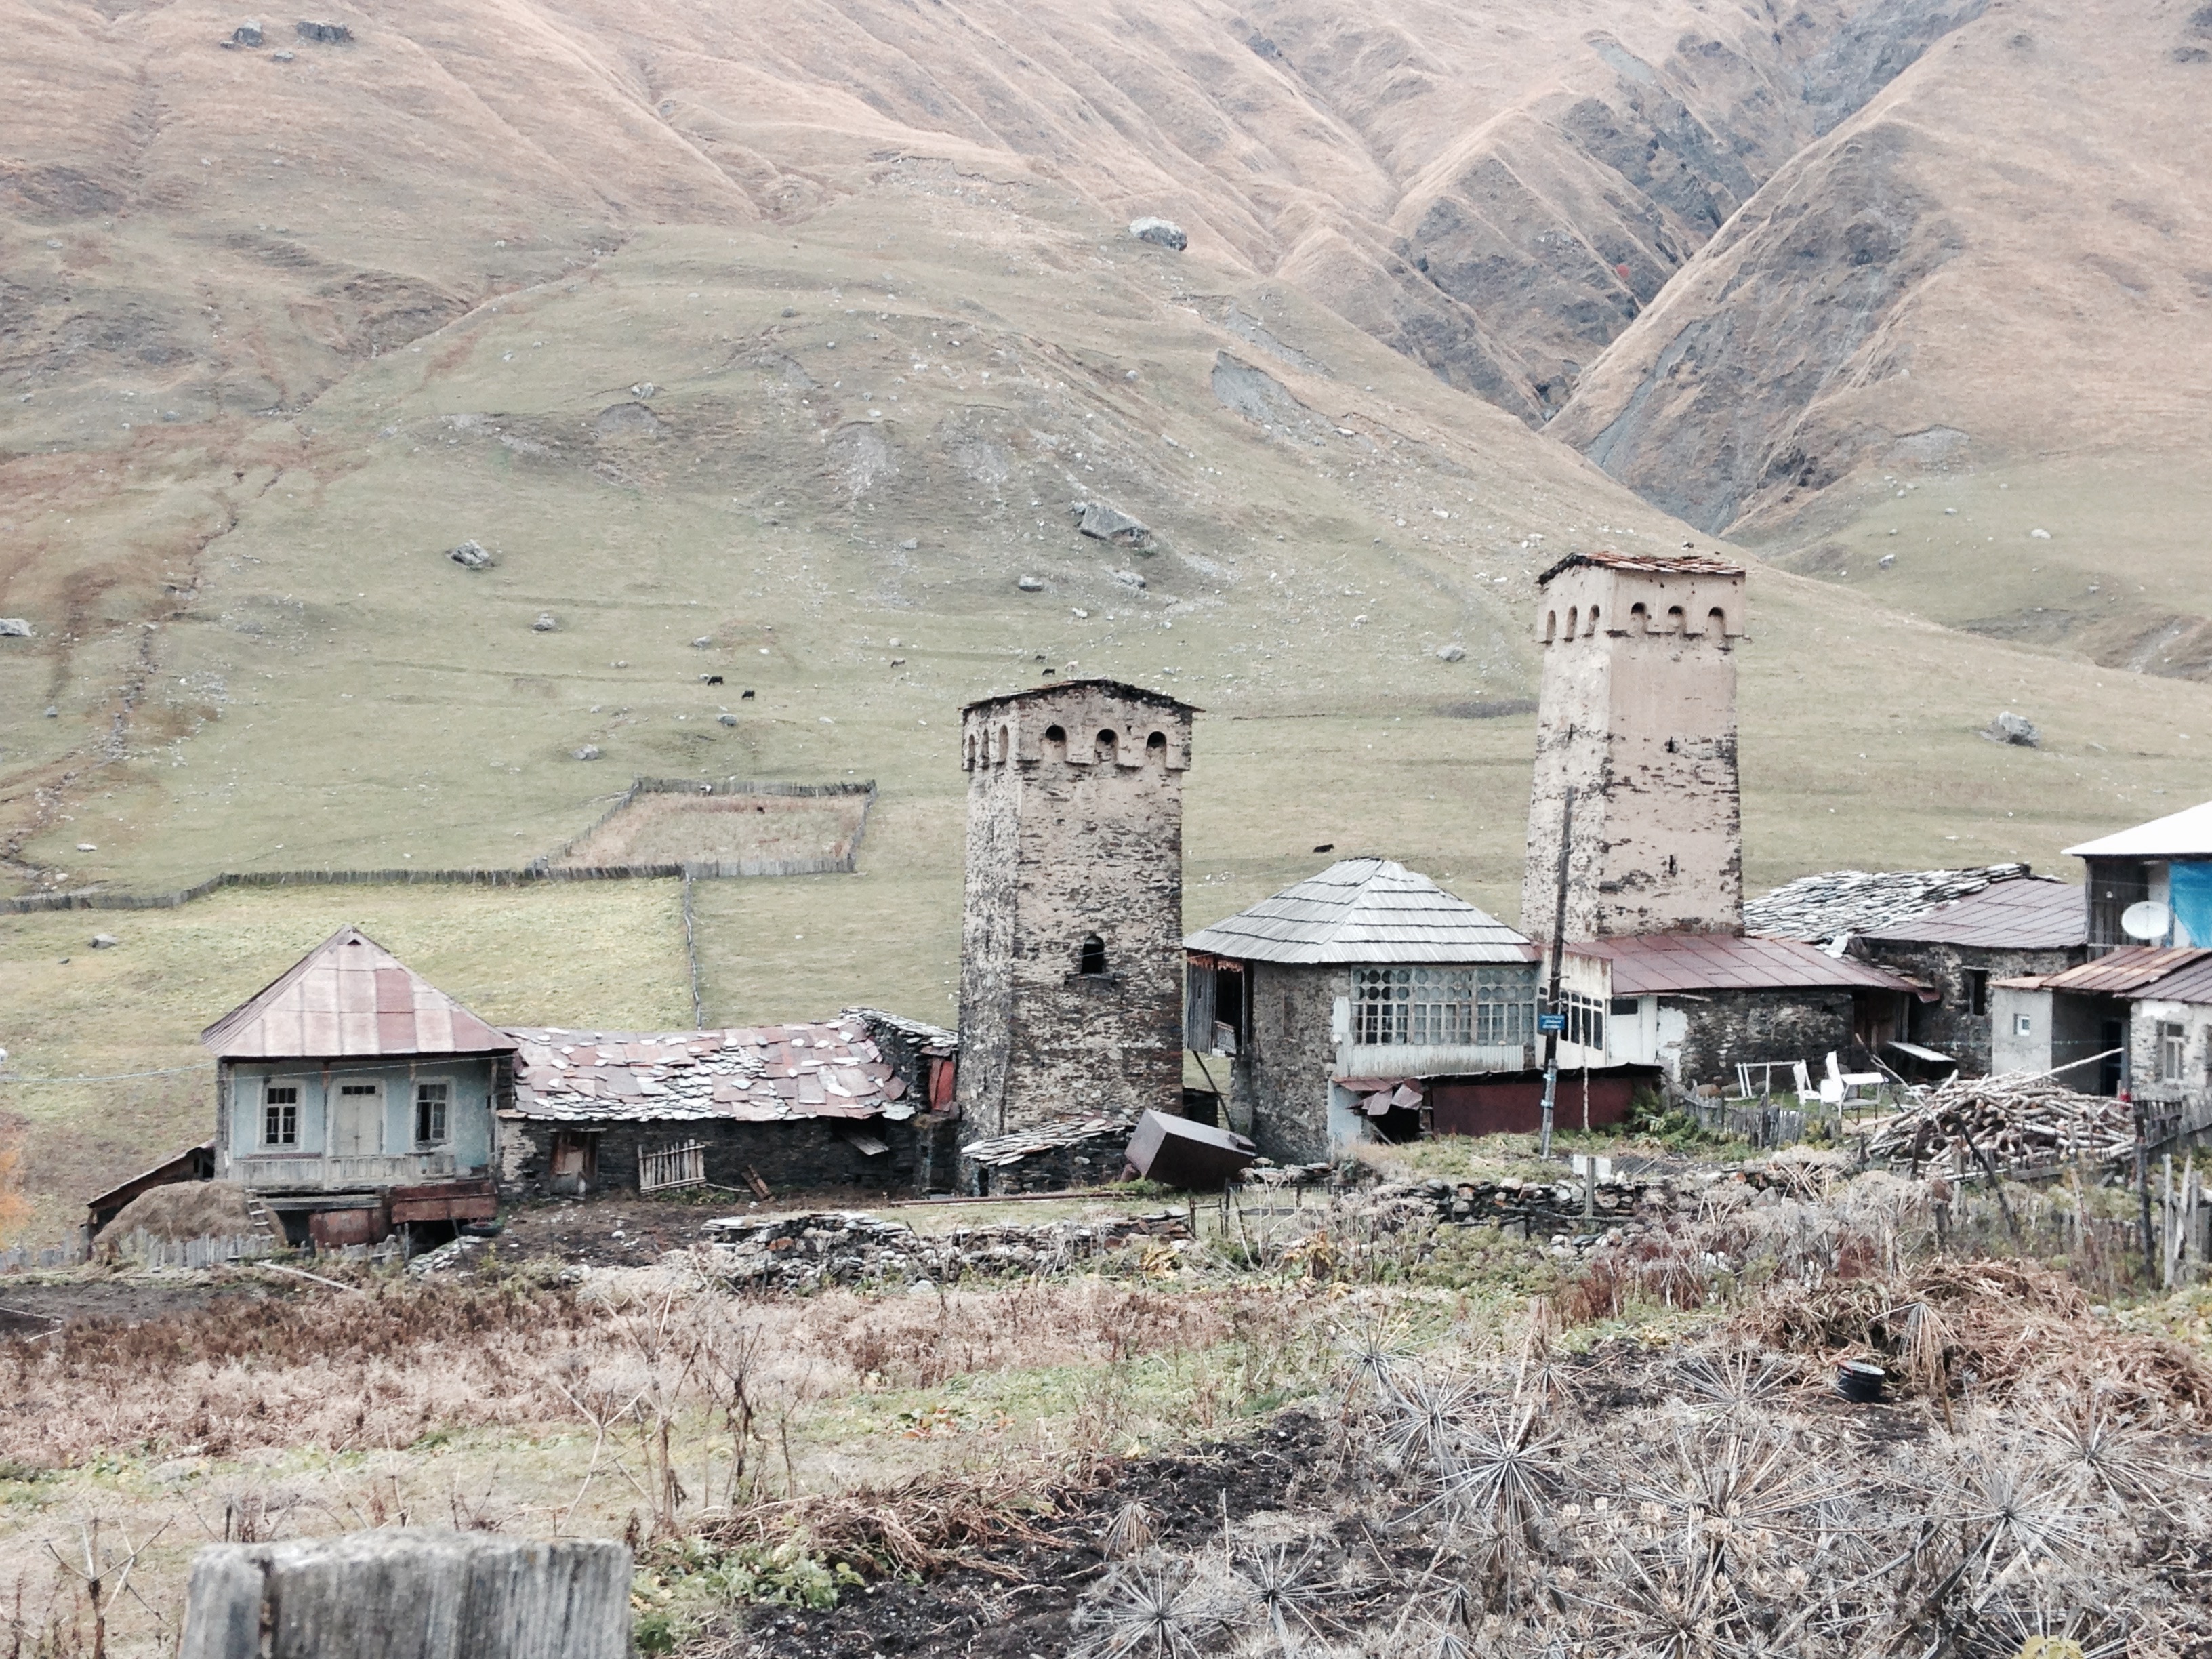 Ushguli is a 12th century UNESCO World heritage site located at 2,200 metres in the Caucasus.